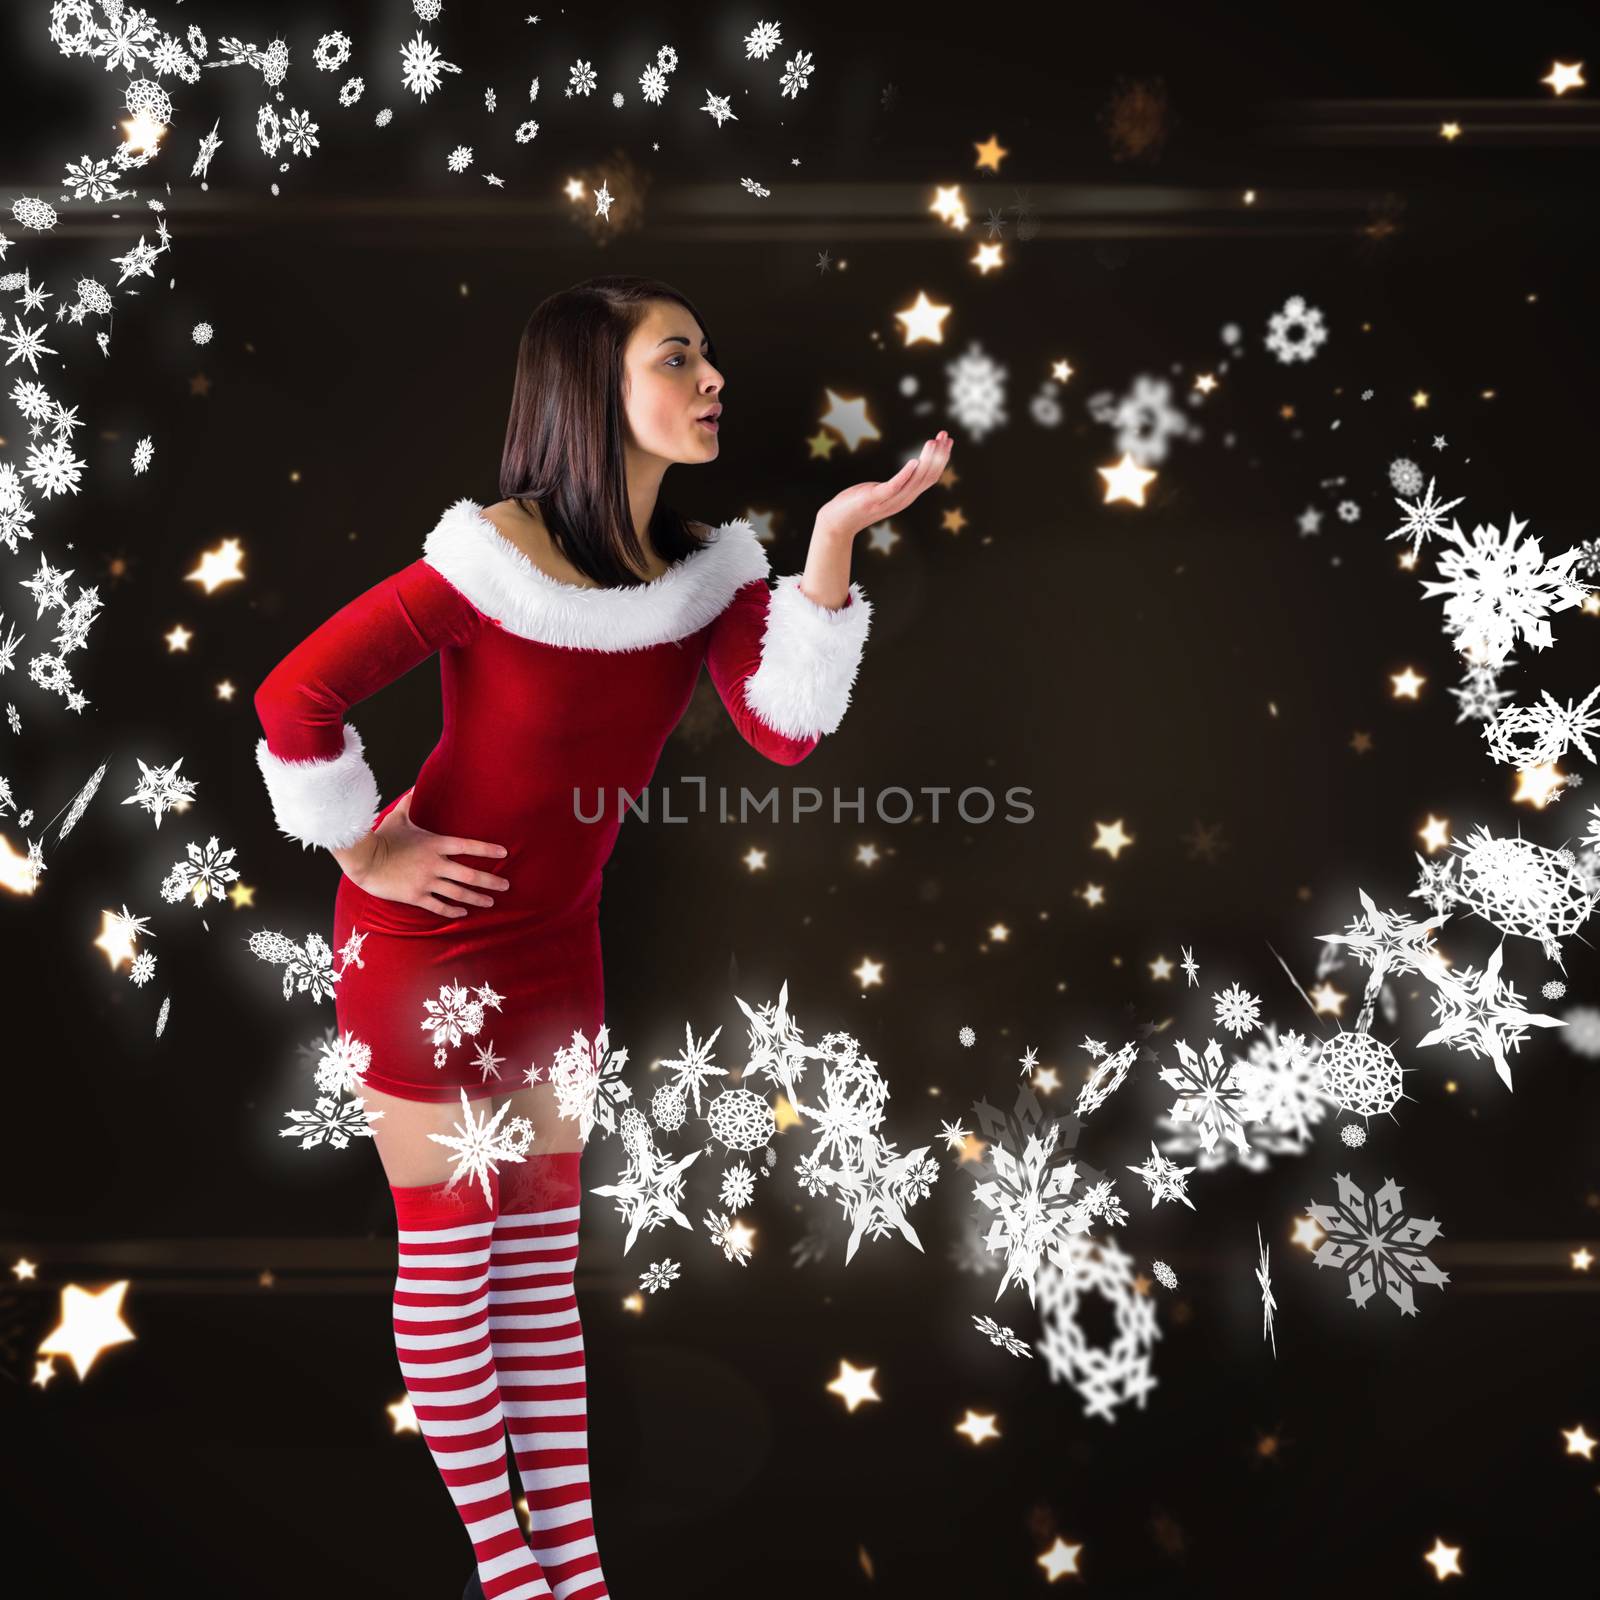 Pretty girl in santa outfit blowing against bright star pattern on black